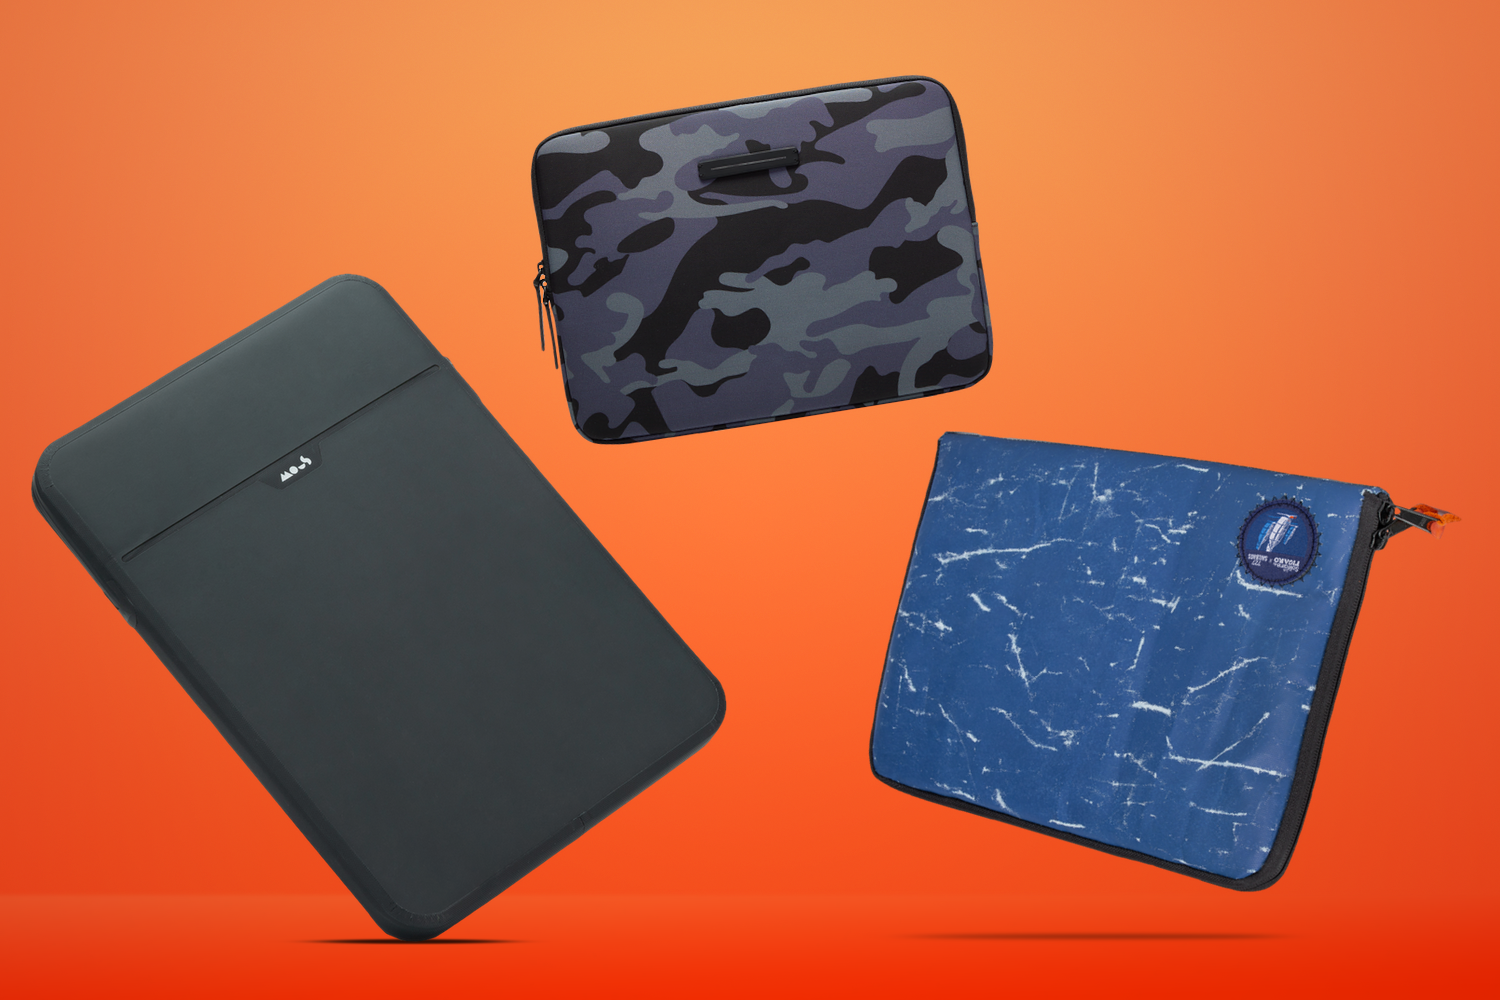 Best Laptop Cases and Sleeves 2022 - Laptop Case Recommendations